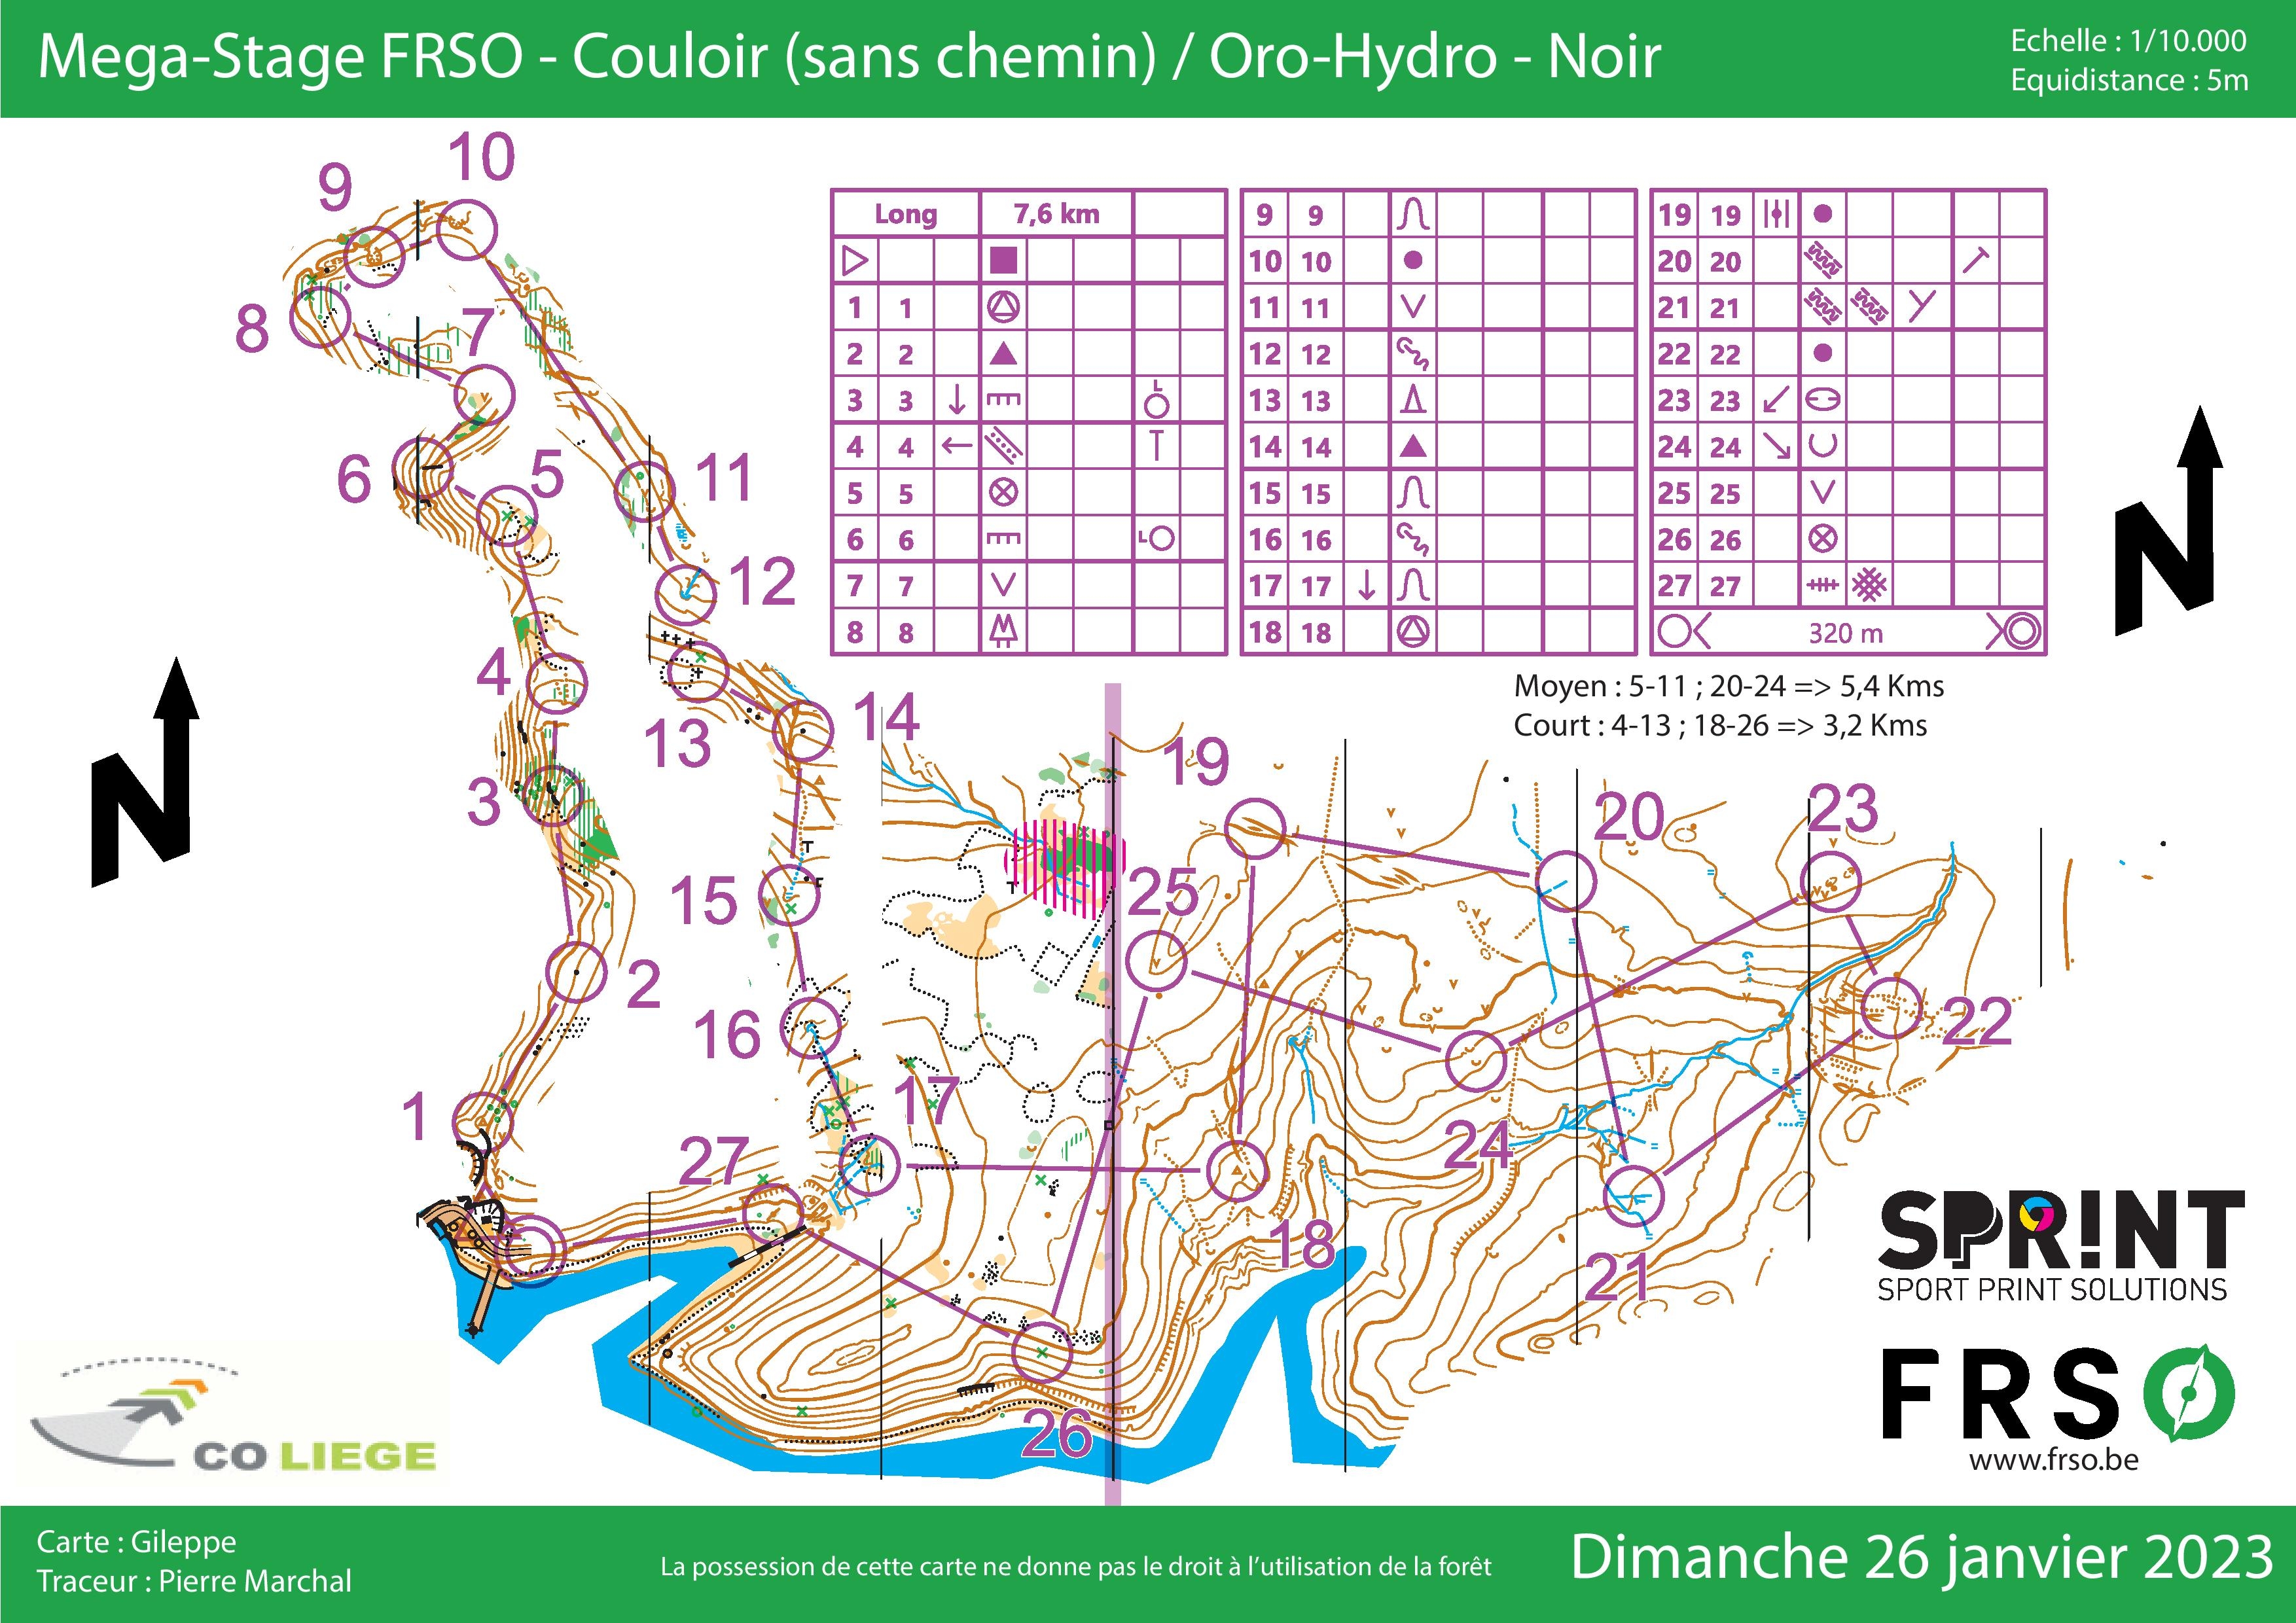 Mégastage FRSO - Couloir et Oro-hydro (2023-02-26)